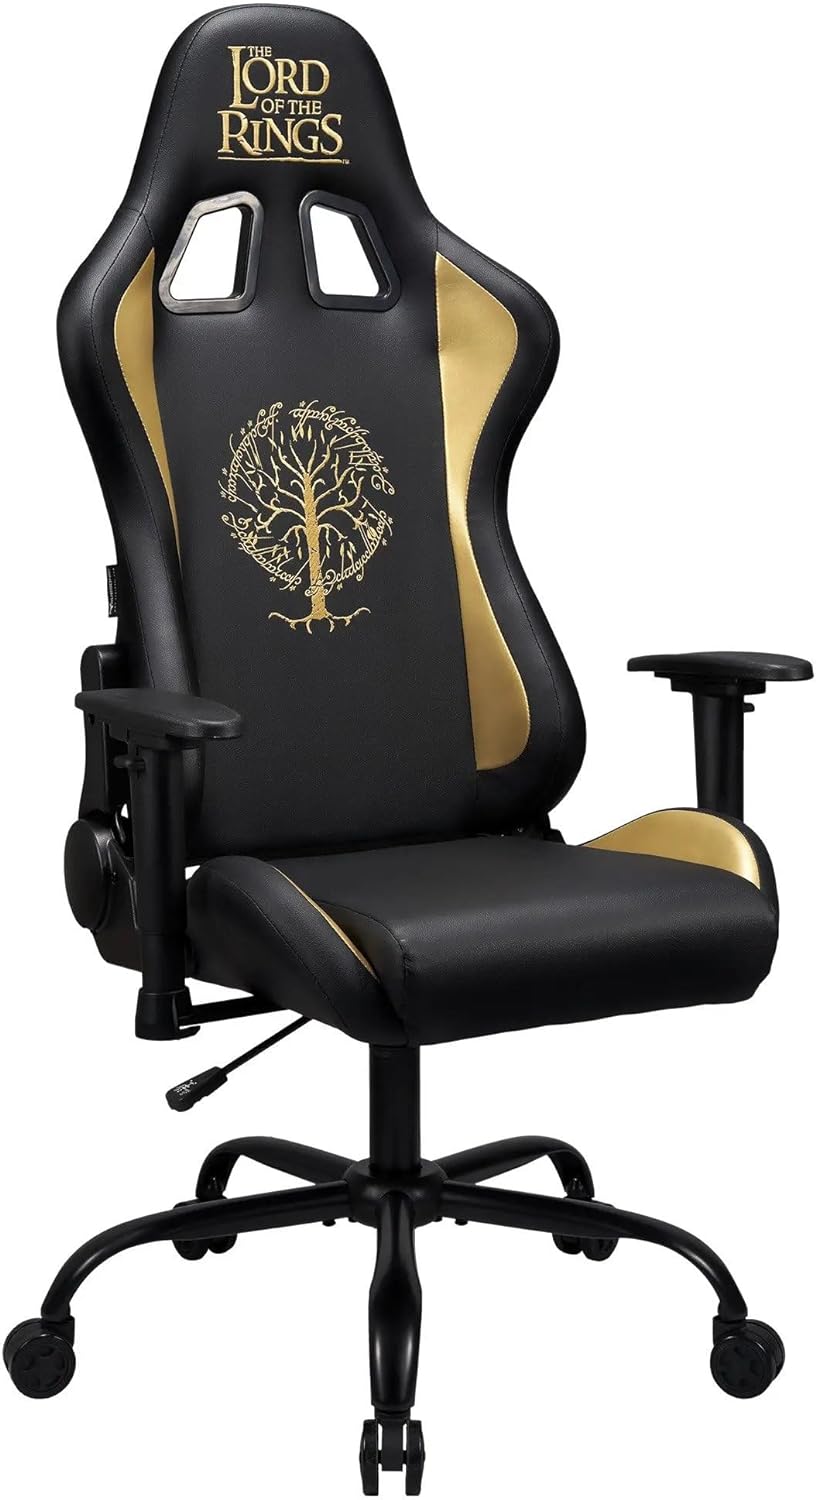 Lord Of The Ring Gaming Chair - Ergonomic Gaming Chair - Adjustable Back and Armrests - High Density Foam